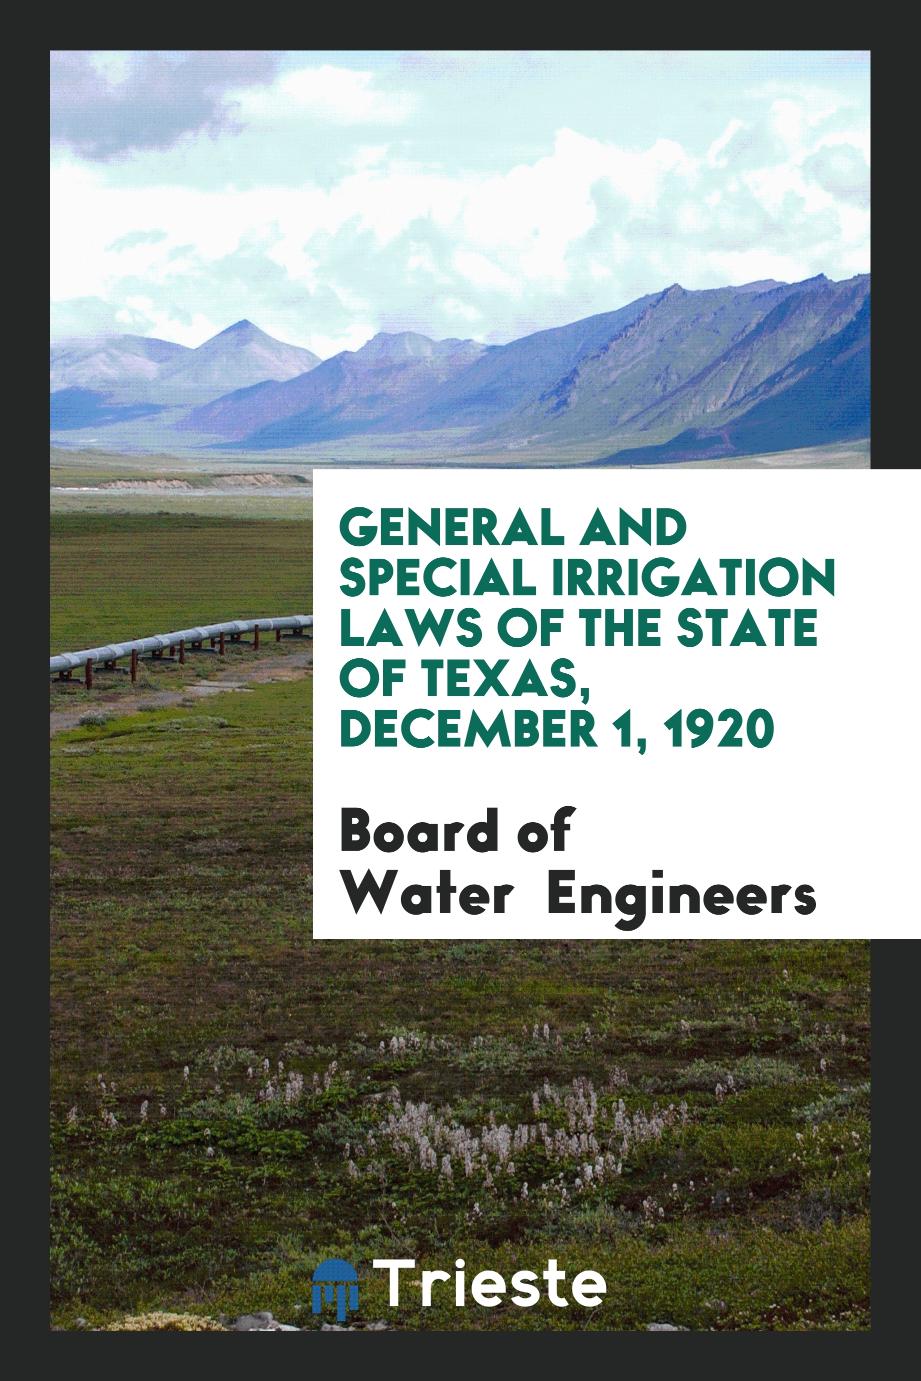 General and Special Irrigation Laws of the State of Texas, December 1, 1920